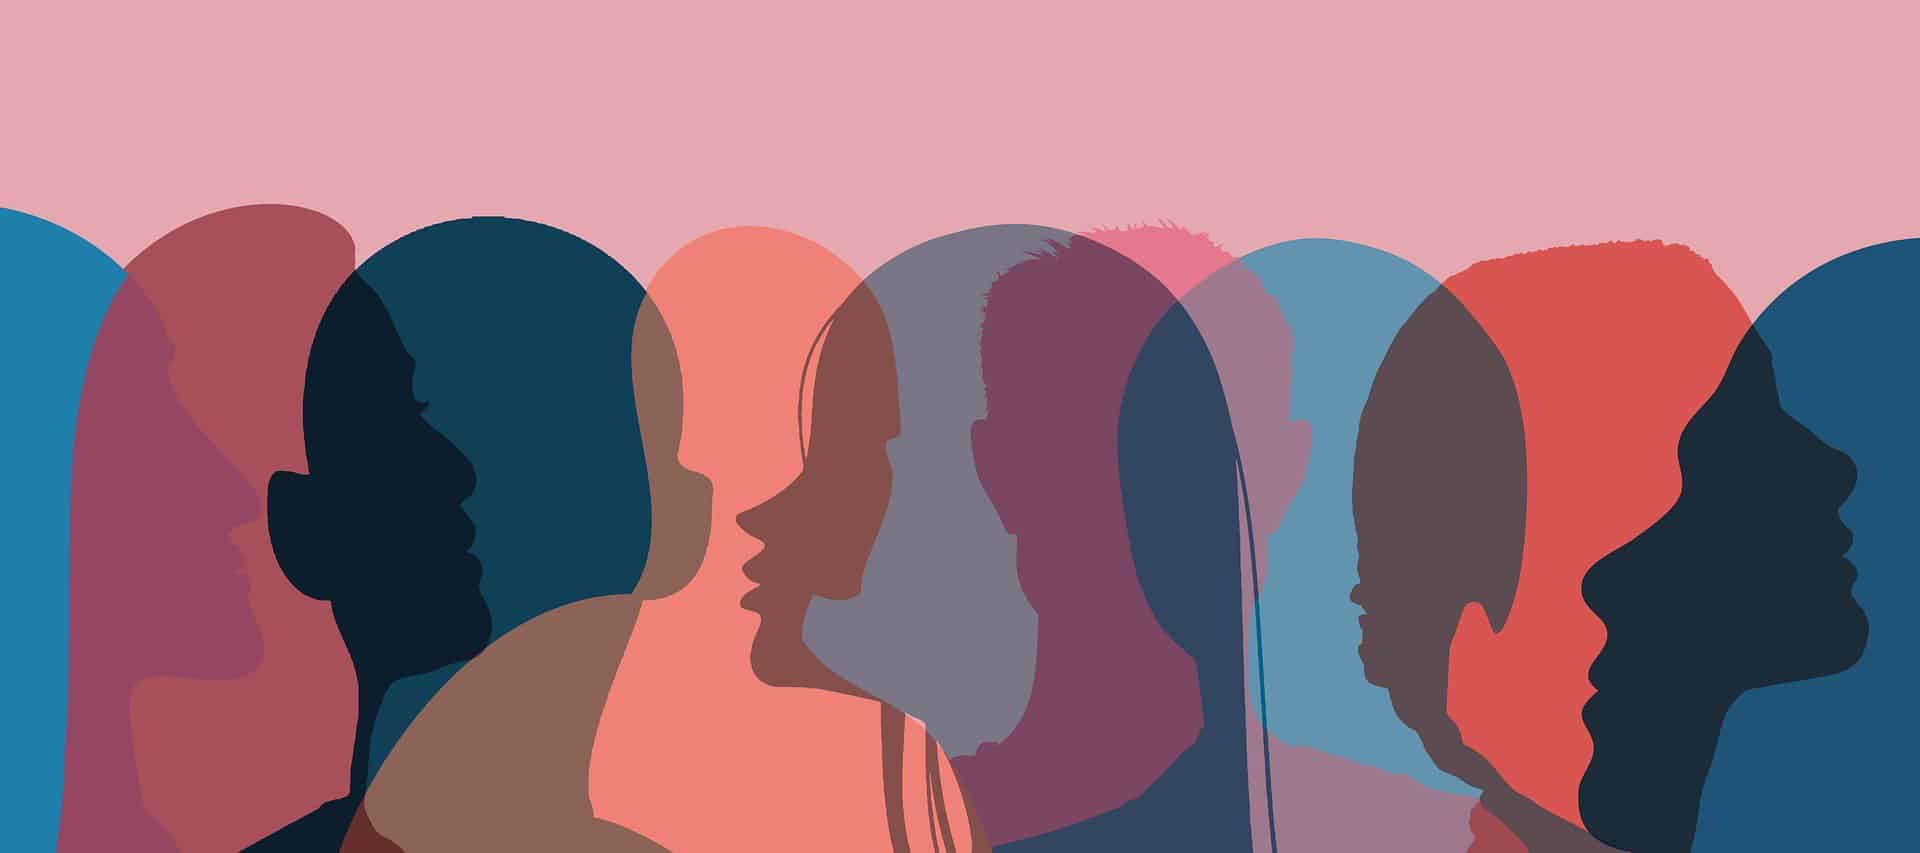 A multicolored graphic shows the outlines of many people's heads.